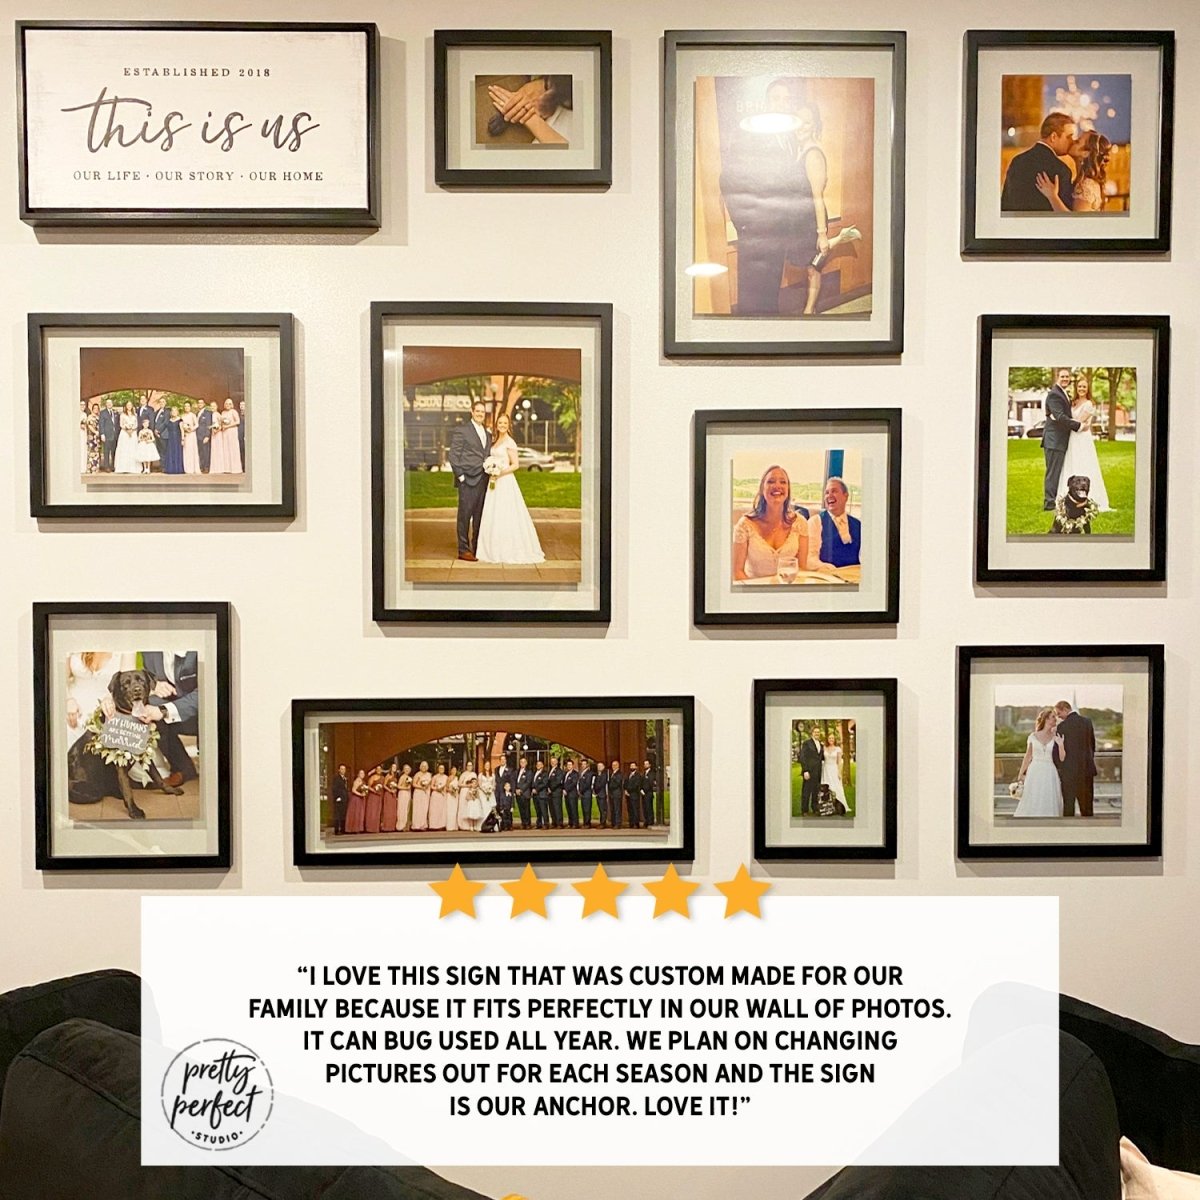 Customer product review for personalized this is us sign by Pretty Perfect Studio